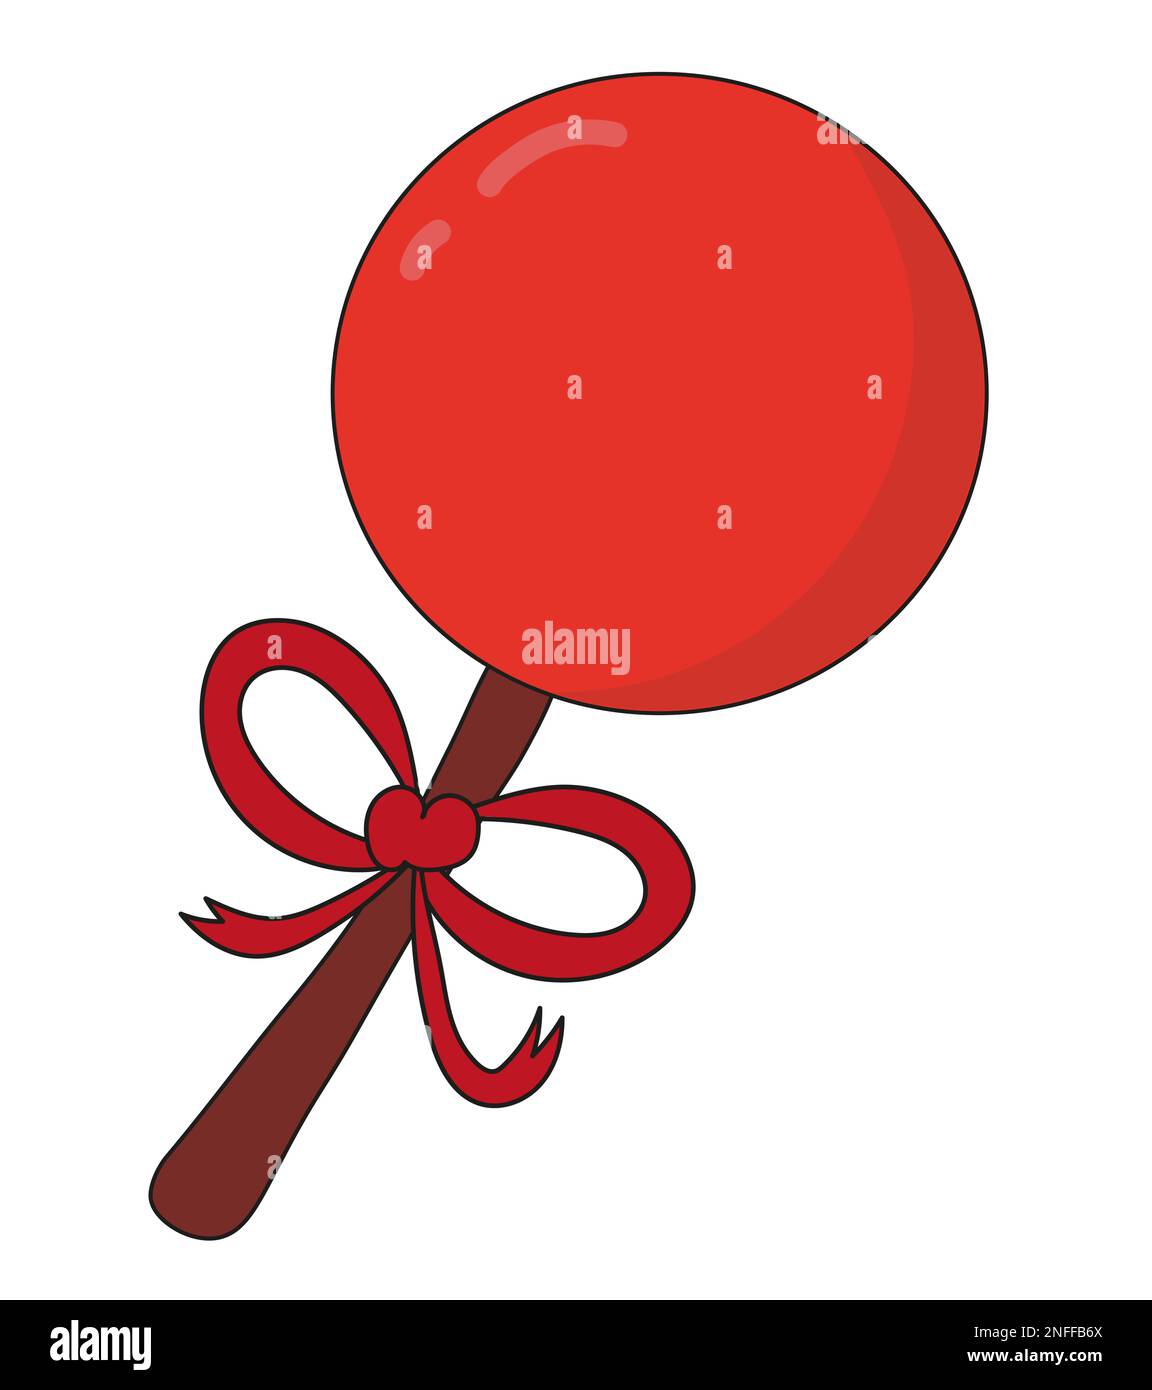 Red round lollipop with ribbon. Candy vector illustration. Dessert sweet food sticker icon. Stock Vector